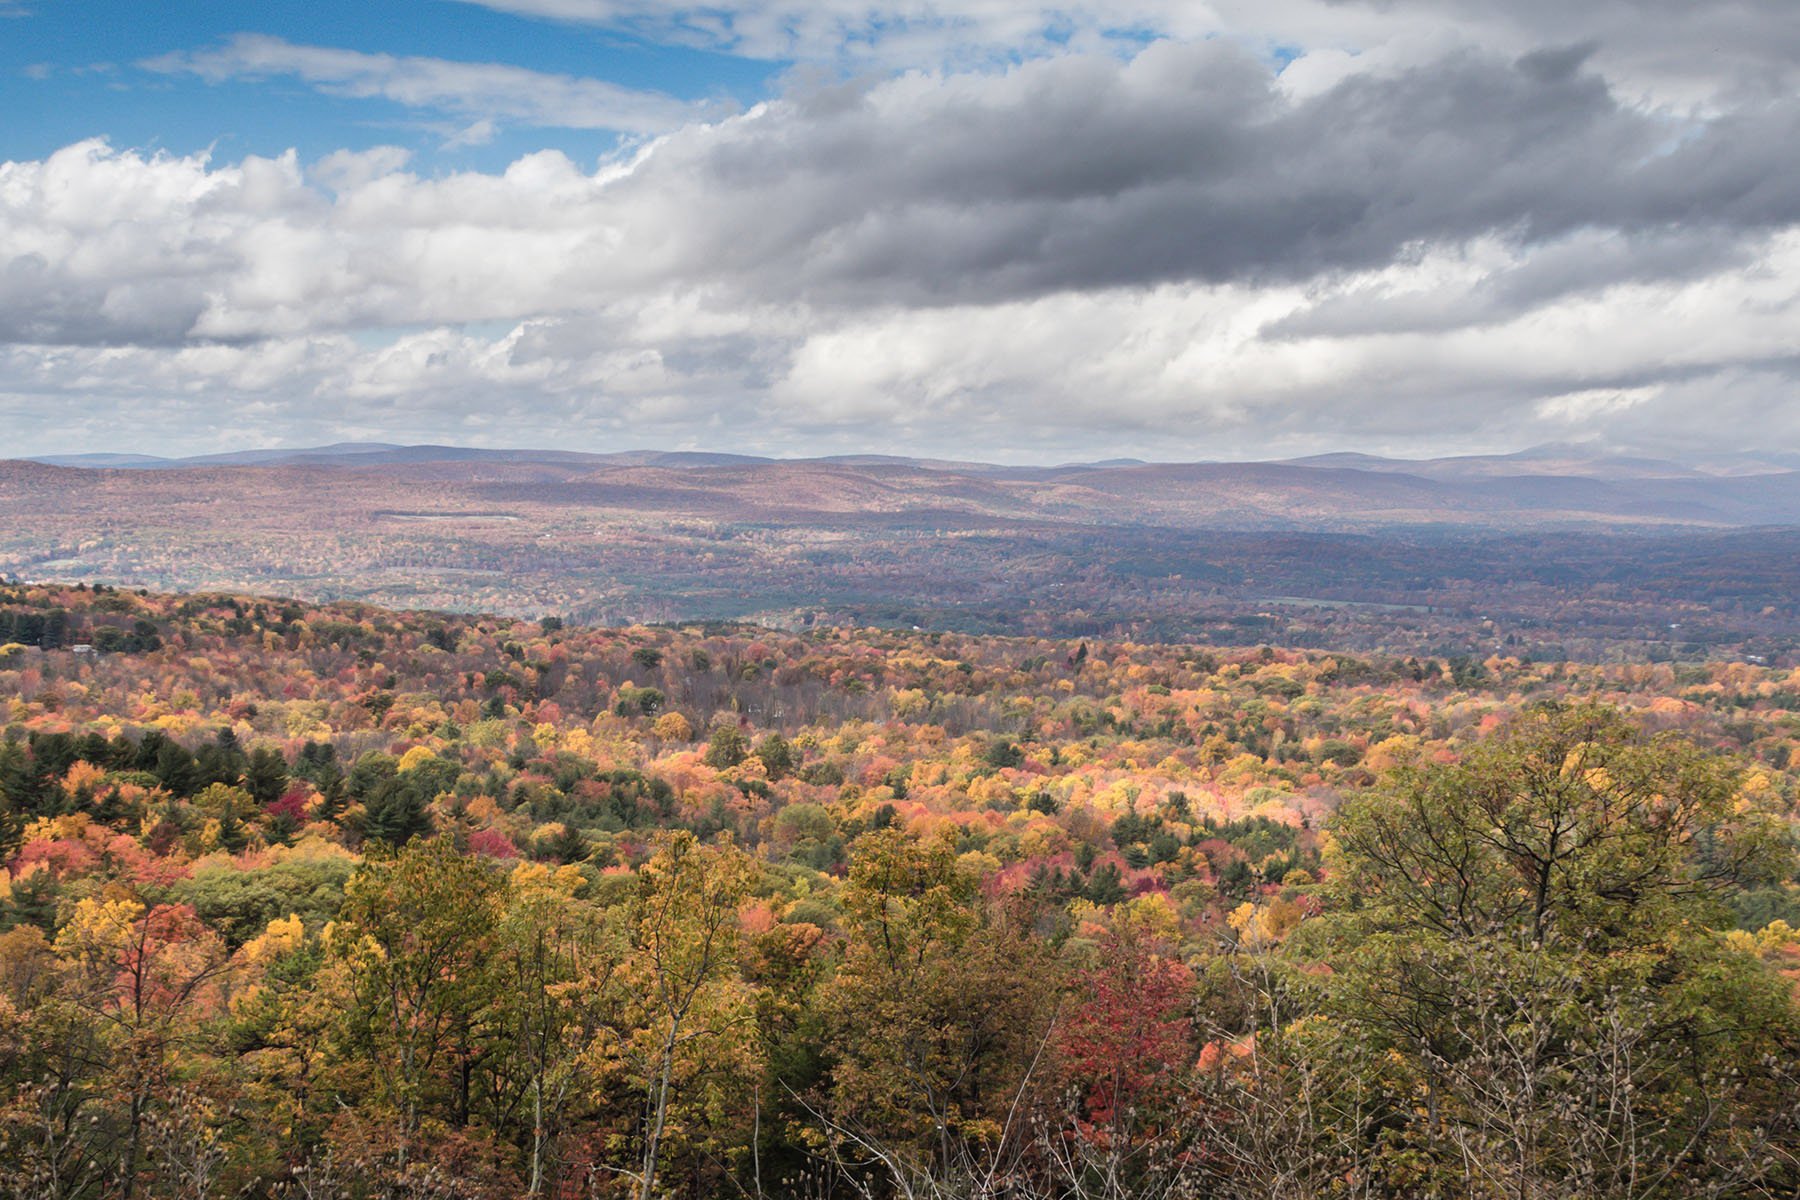 A scenic overlook displays brilliant fall foliage under bright a